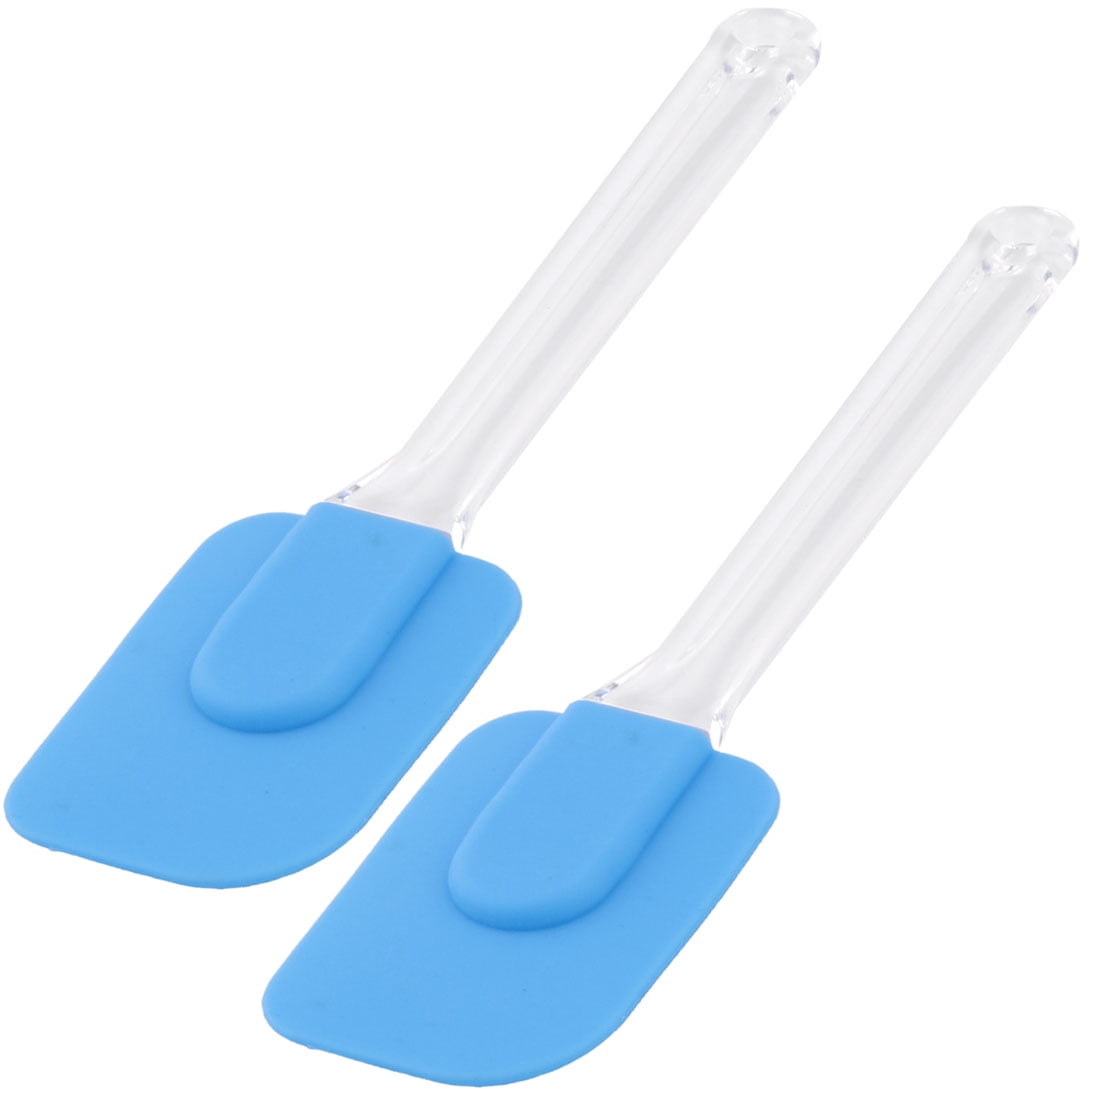 Details about   Silicone Cake Cream Scraper Spatula Mixing Brush Butter Kitchen Baking Tools DIY 